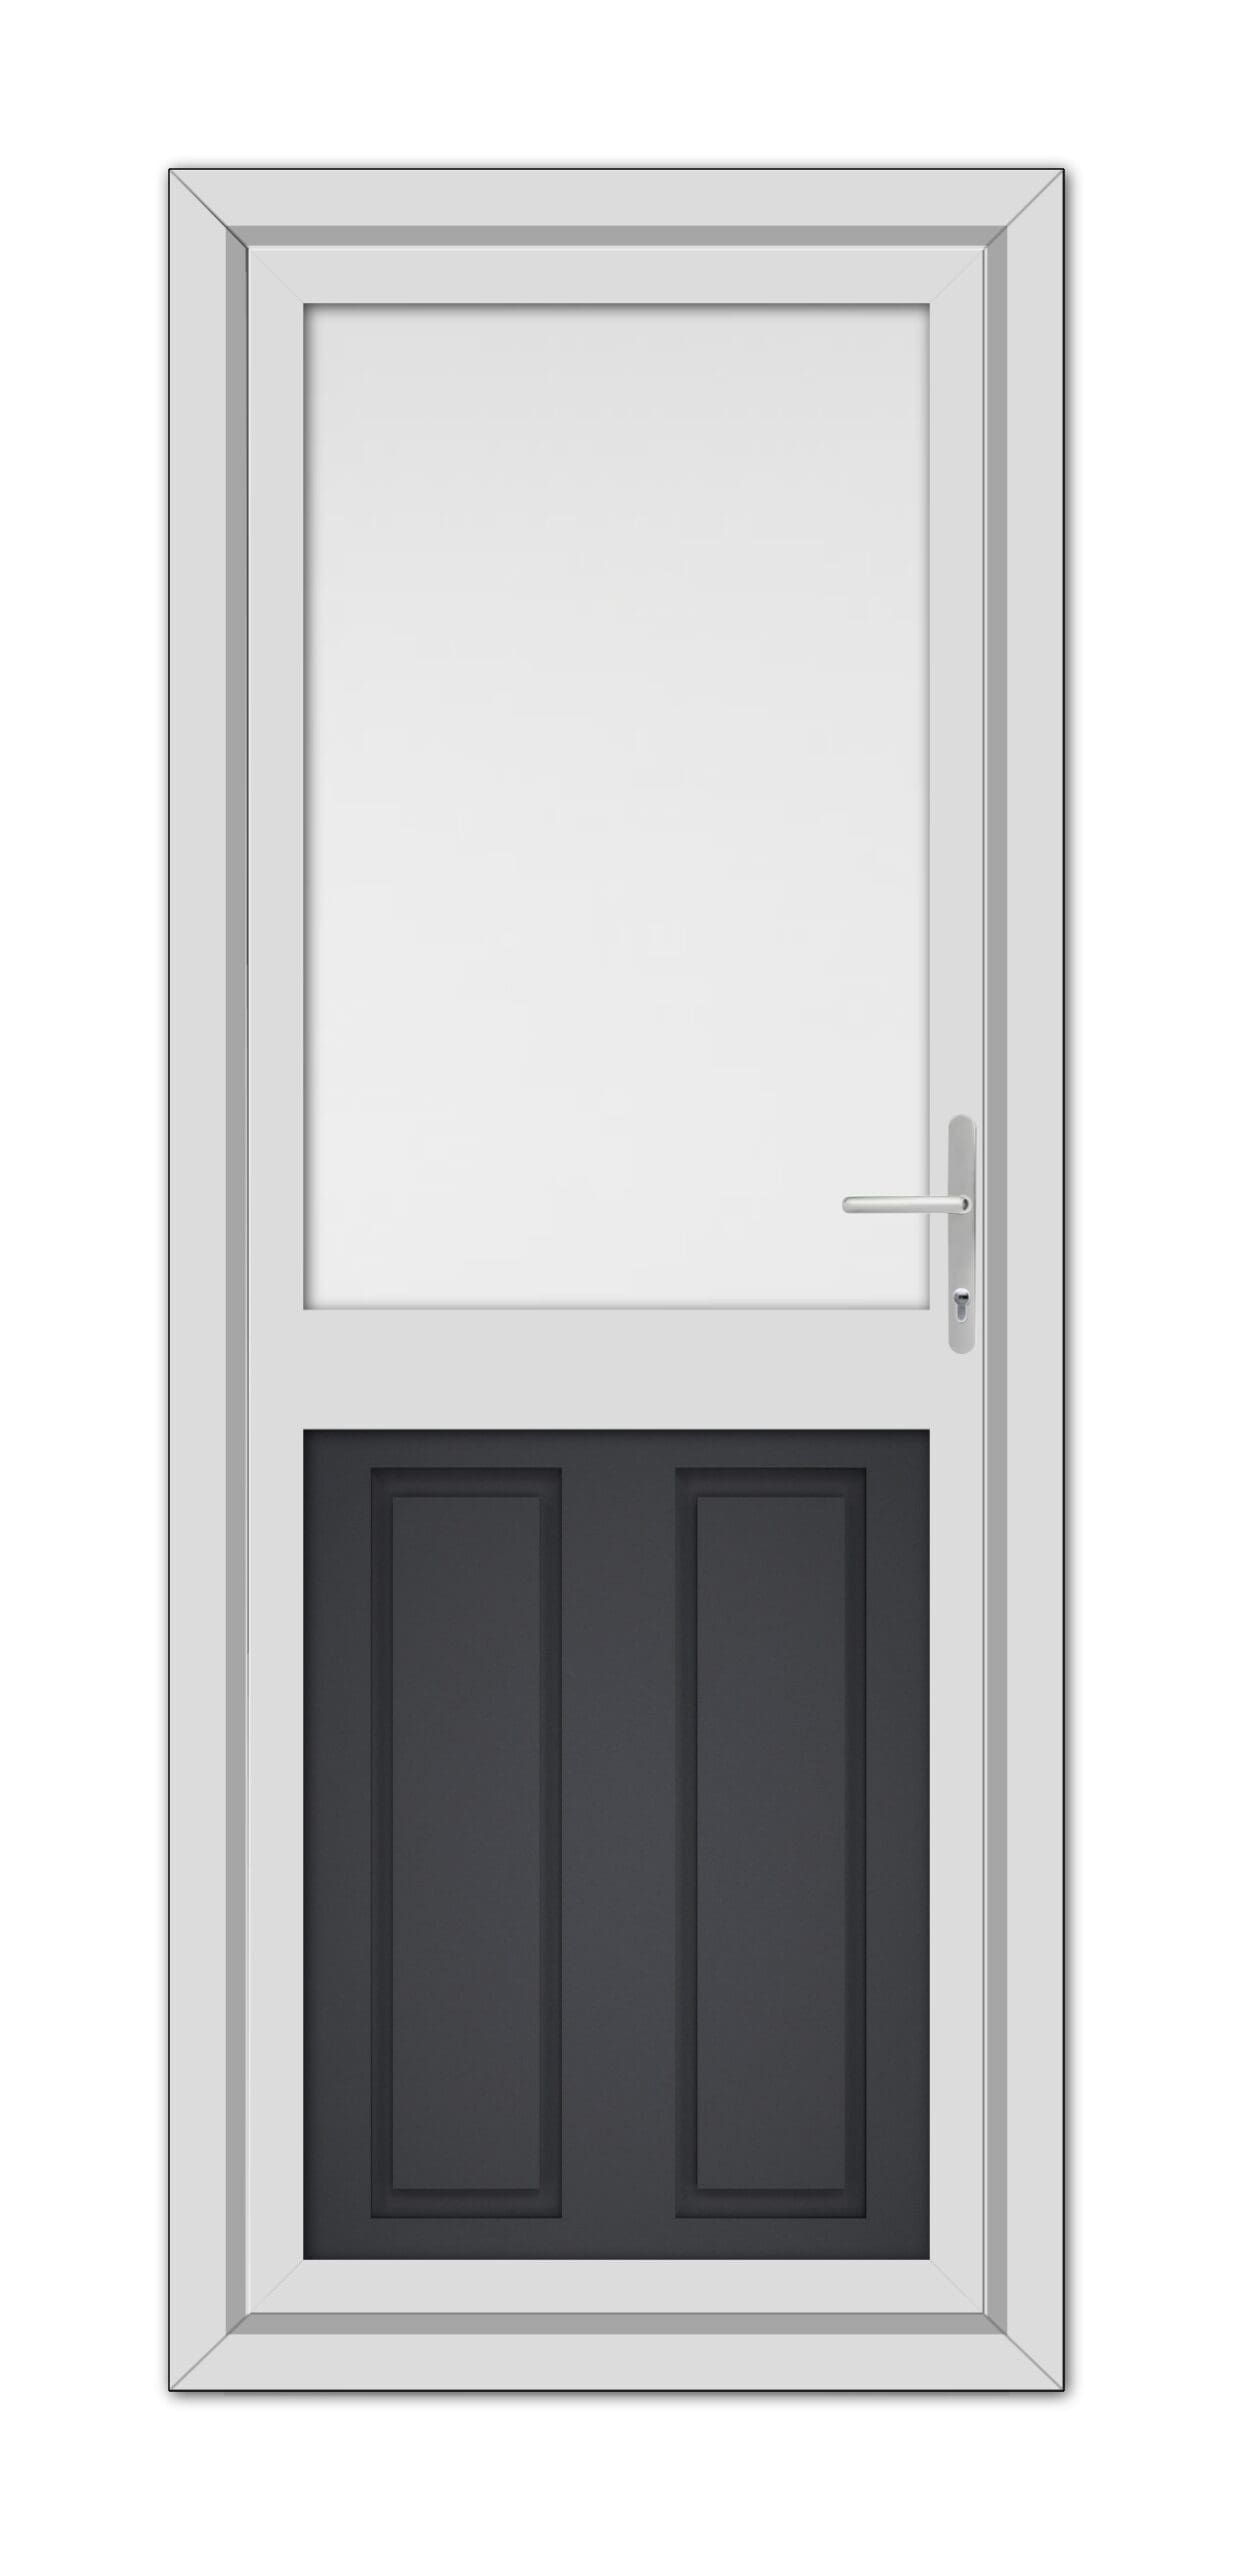 A Grey Manor Half uPVC Back Door with upper glass panel and lower solid double panels, featuring a silver handle, isolated on a white background.